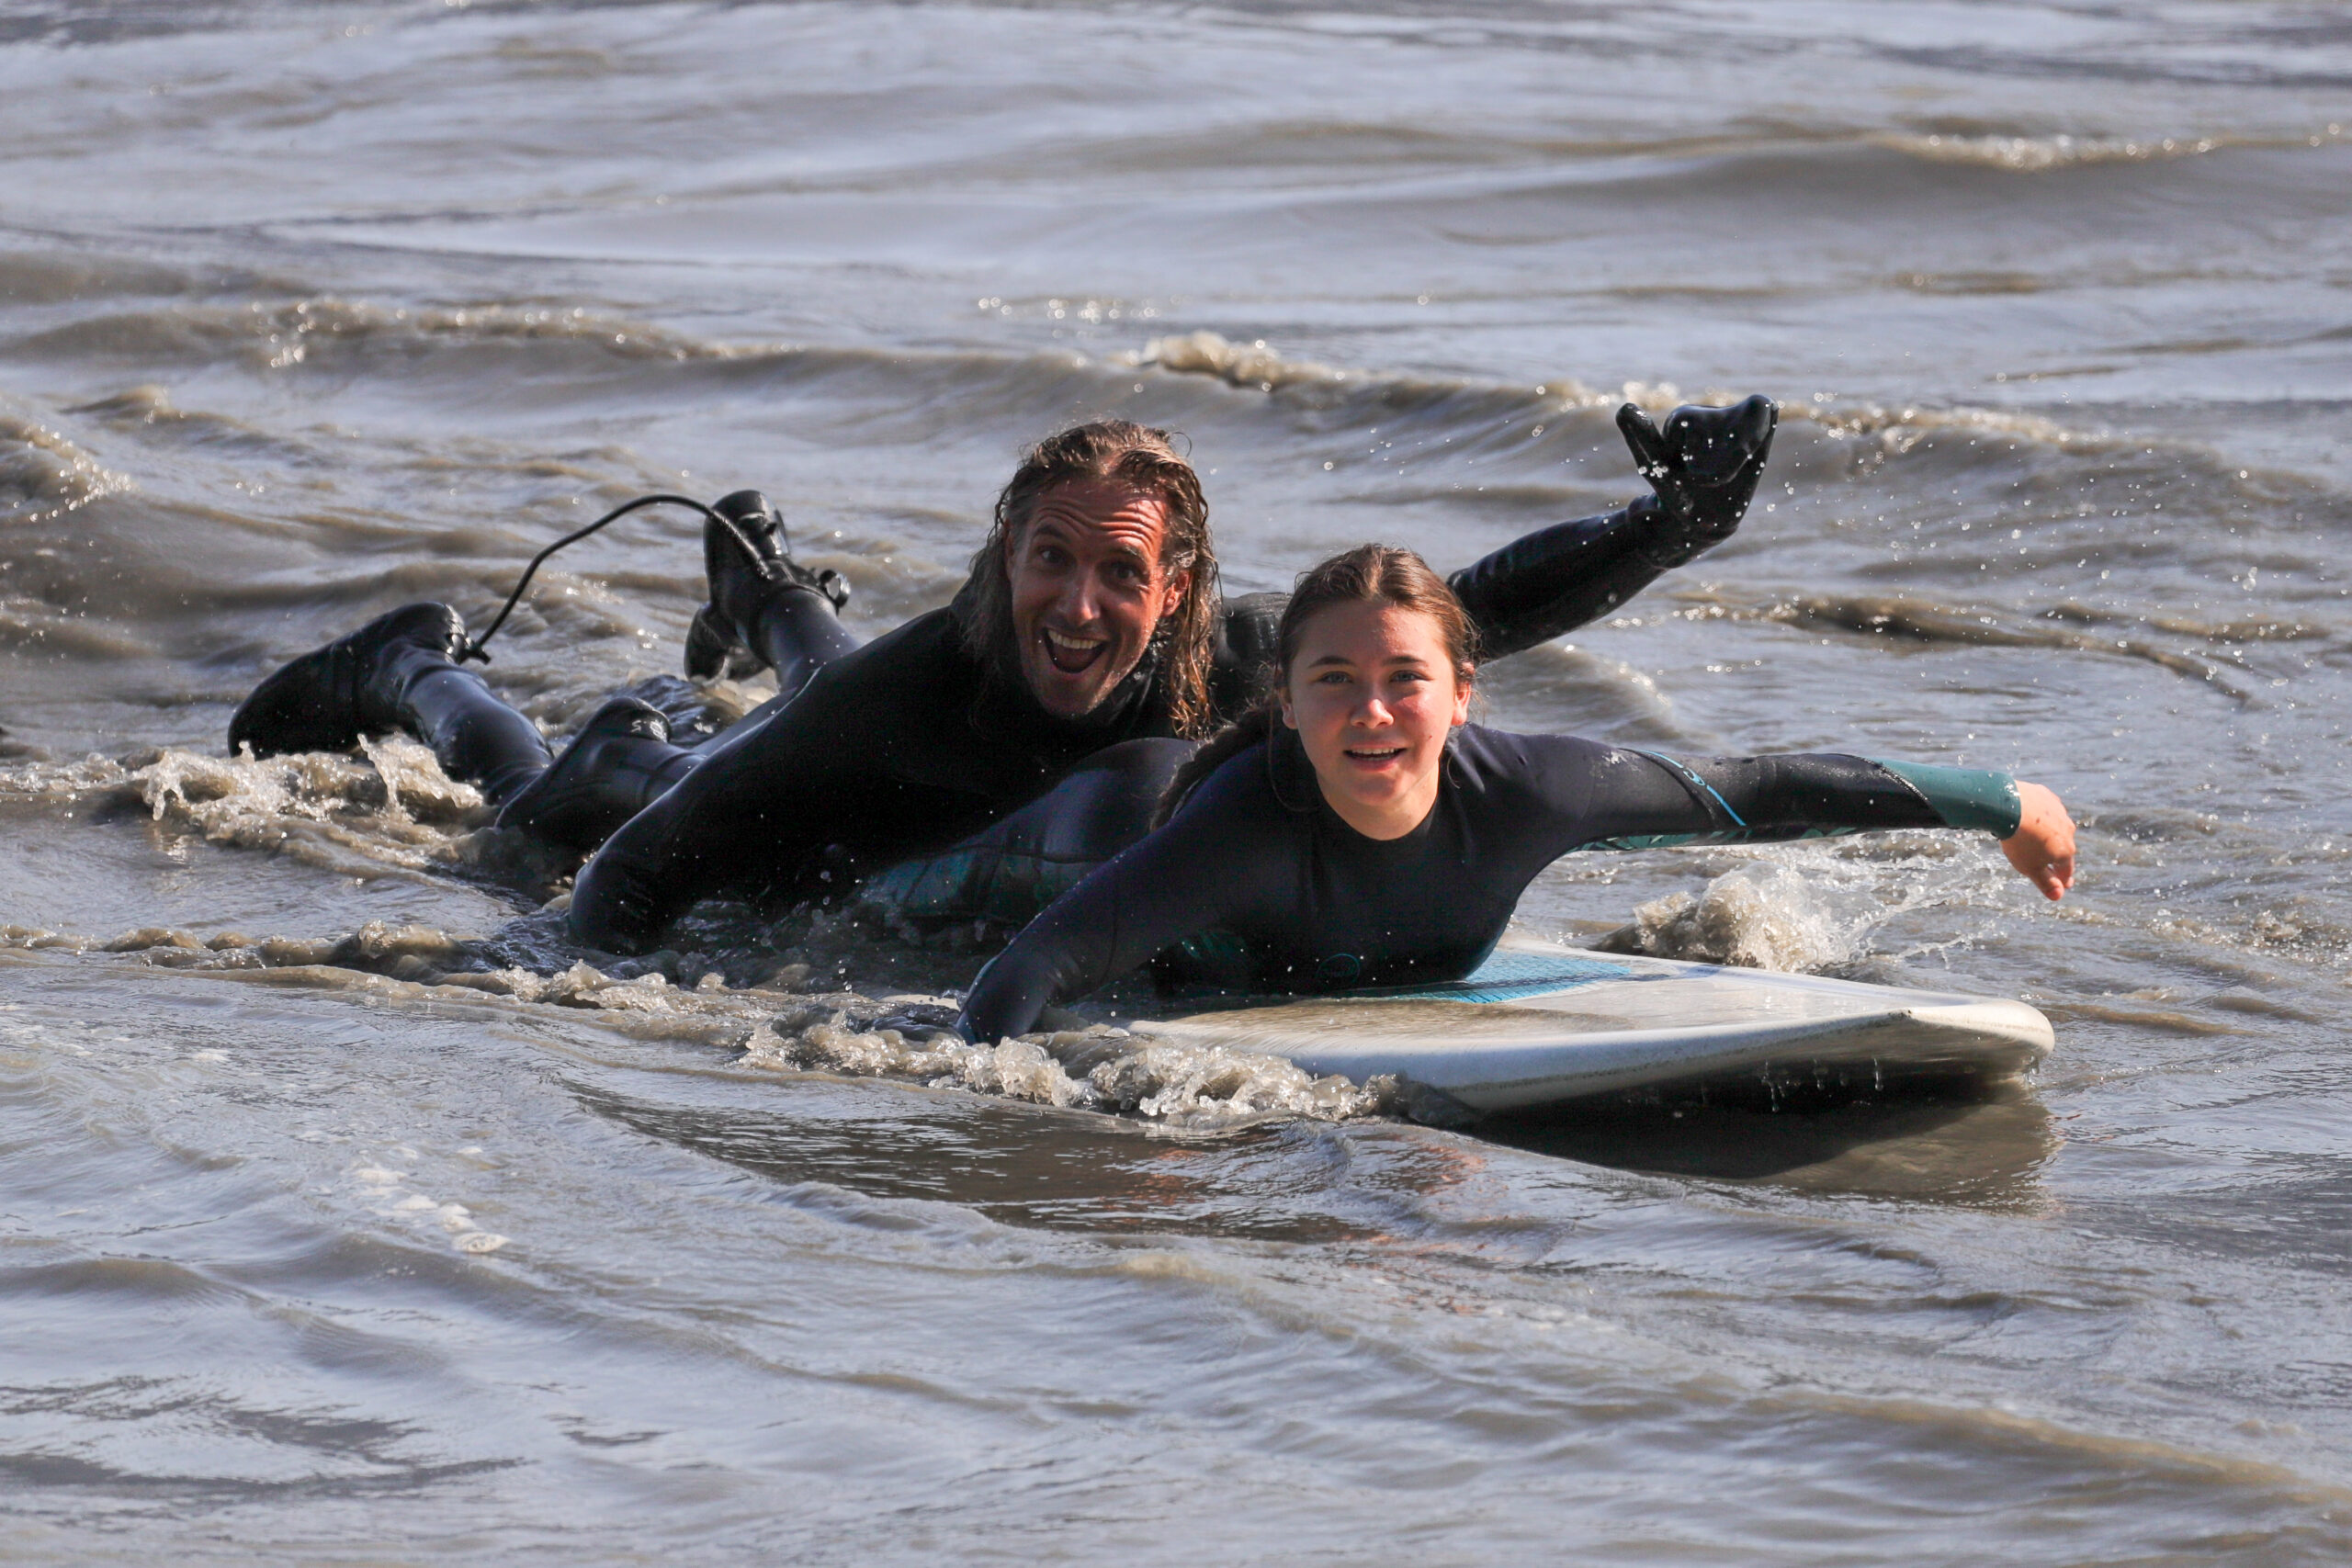 Two people ride on the same surfboard. One is giving the "hang loose" sign.